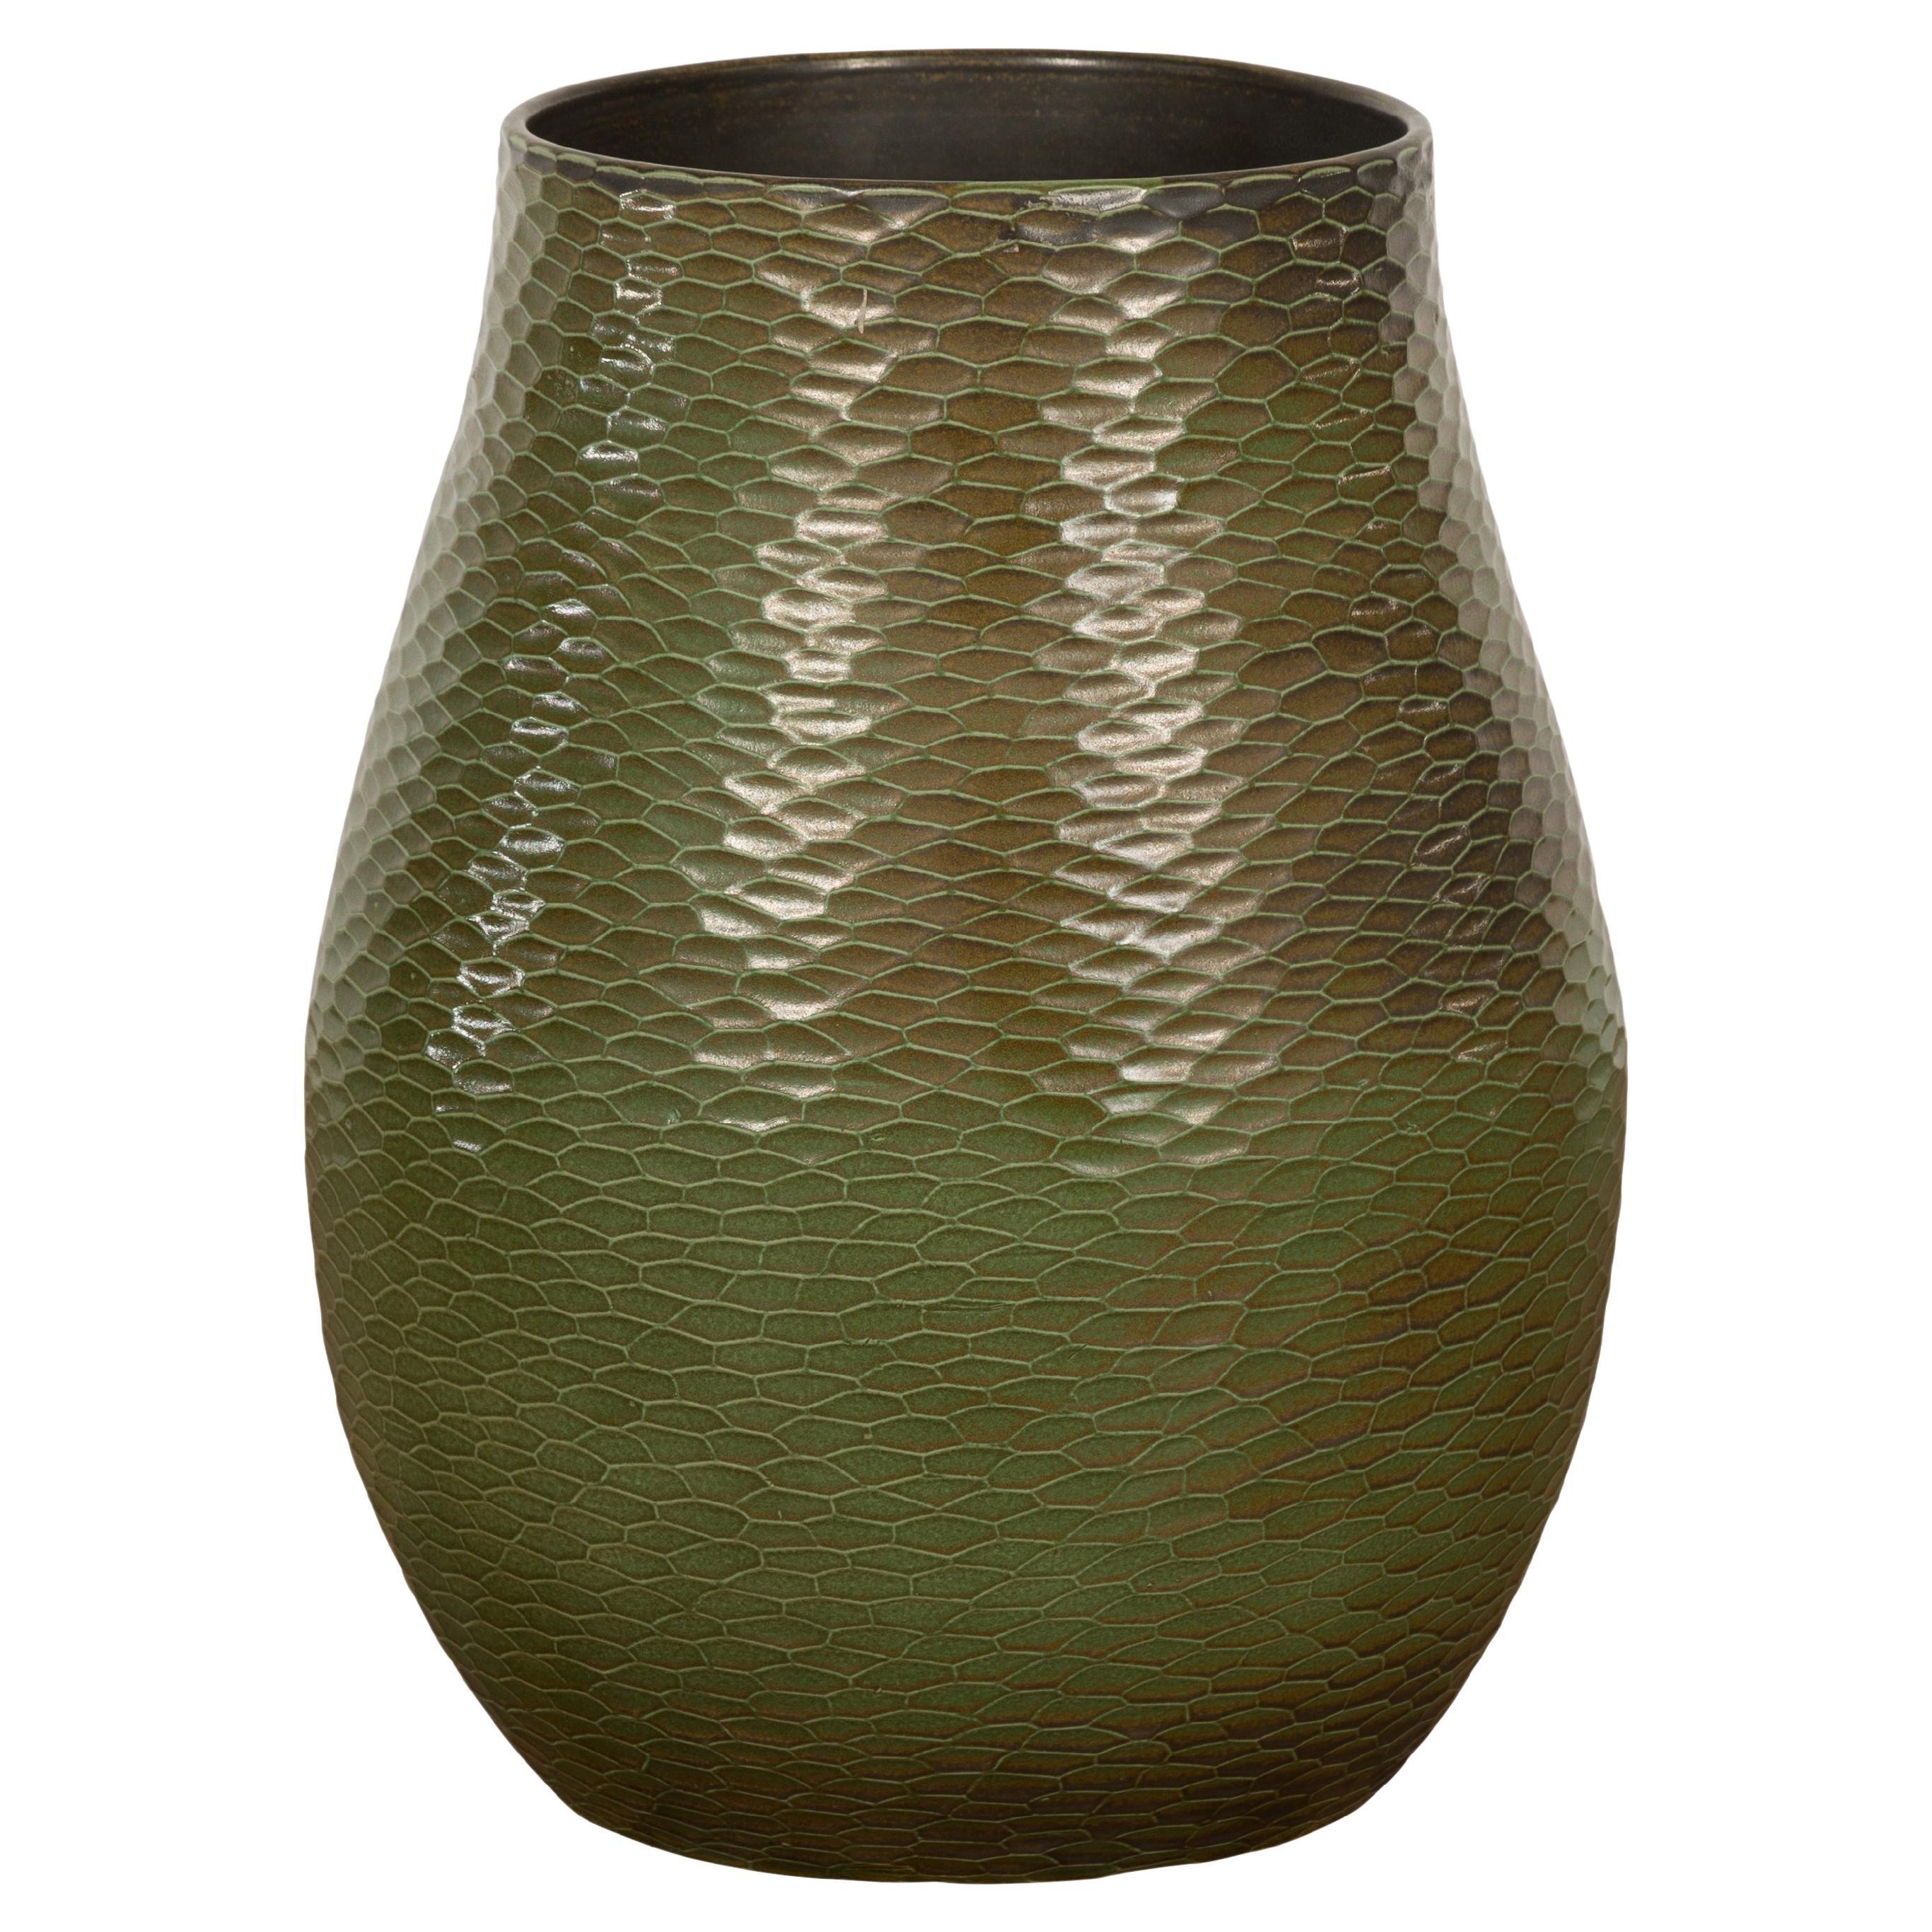 Prem Collection Handcrafted Green Vase with Textured Honeycomb Style Motifs